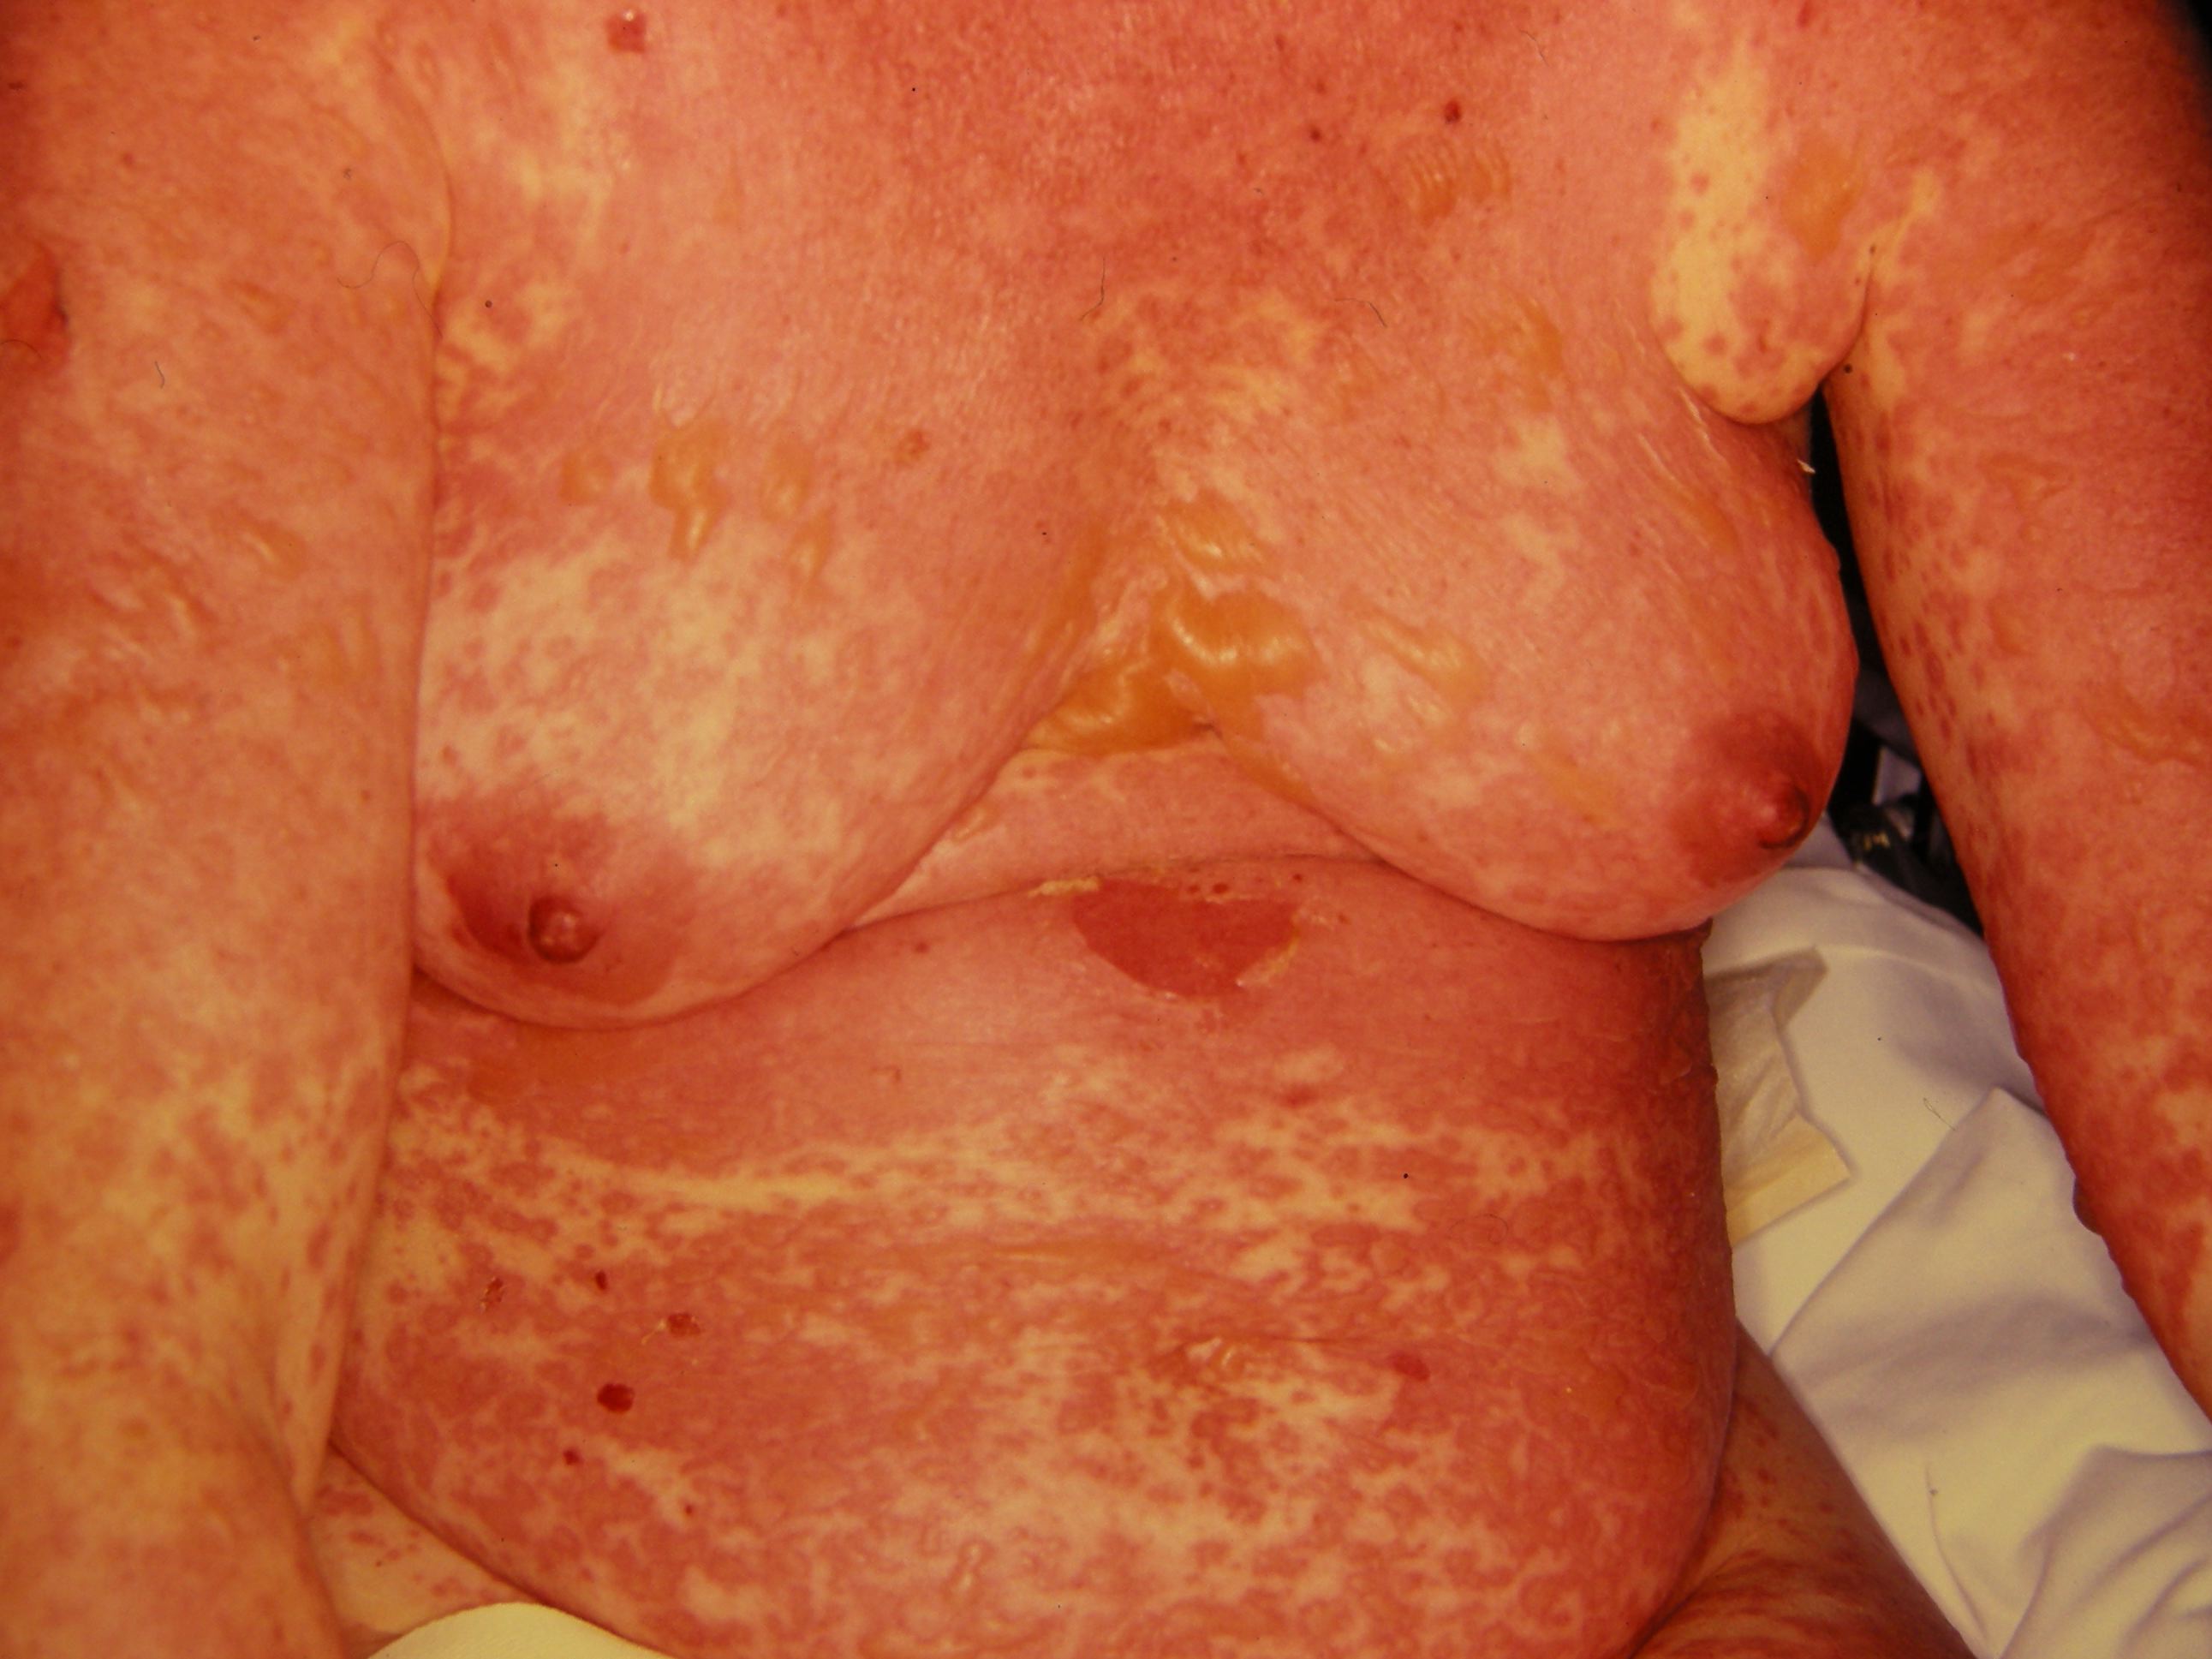 Widespread early morbilliform eruption with flaccid bullae in patient with toxic epidermal necrolysis